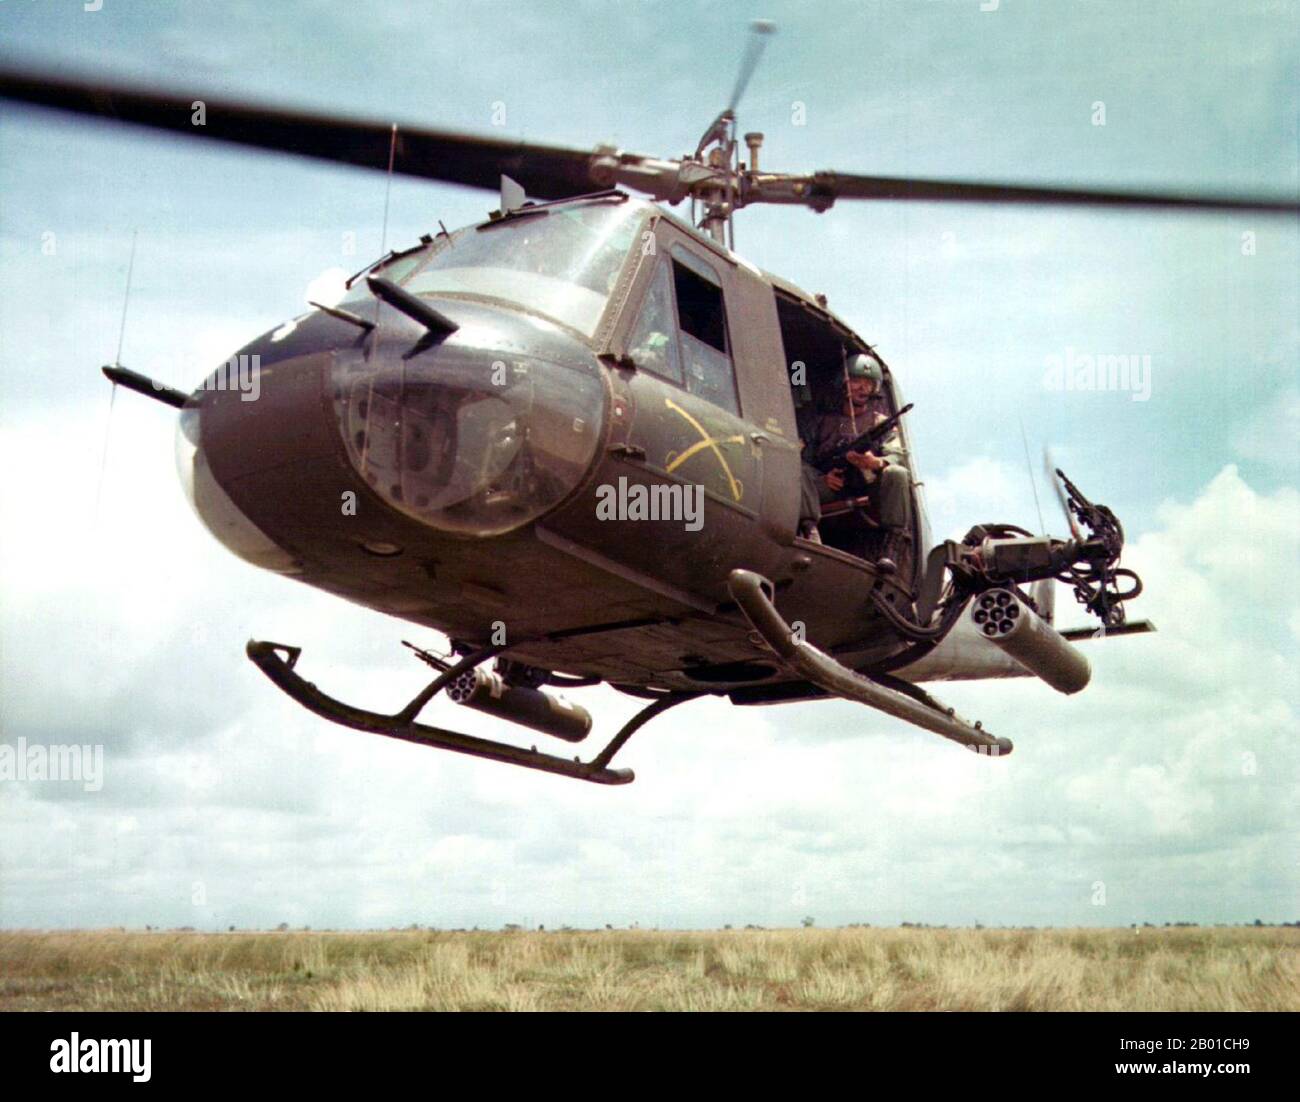 Vietnam: U.S. Army Sgt. Dennis Troxel sits as 'Shotgun Rider' in the door of a Bell UH-1B Huey helicopter of the 179th Aviation Company, Vietnam, 1965.  The Second Indochina War, known in America as the Vietnam War, was a Cold War era military conflict that occurred in Vietnam, Laos, and Cambodia from 1 November 1955 to the fall of Saigon on 30 April 1975. This war followed the First Indochina War and was fought between North Vietnam, supported by its communist allies, and the government of South Vietnam, supported by the U.S. and other anti-communist nations. Stock Photo